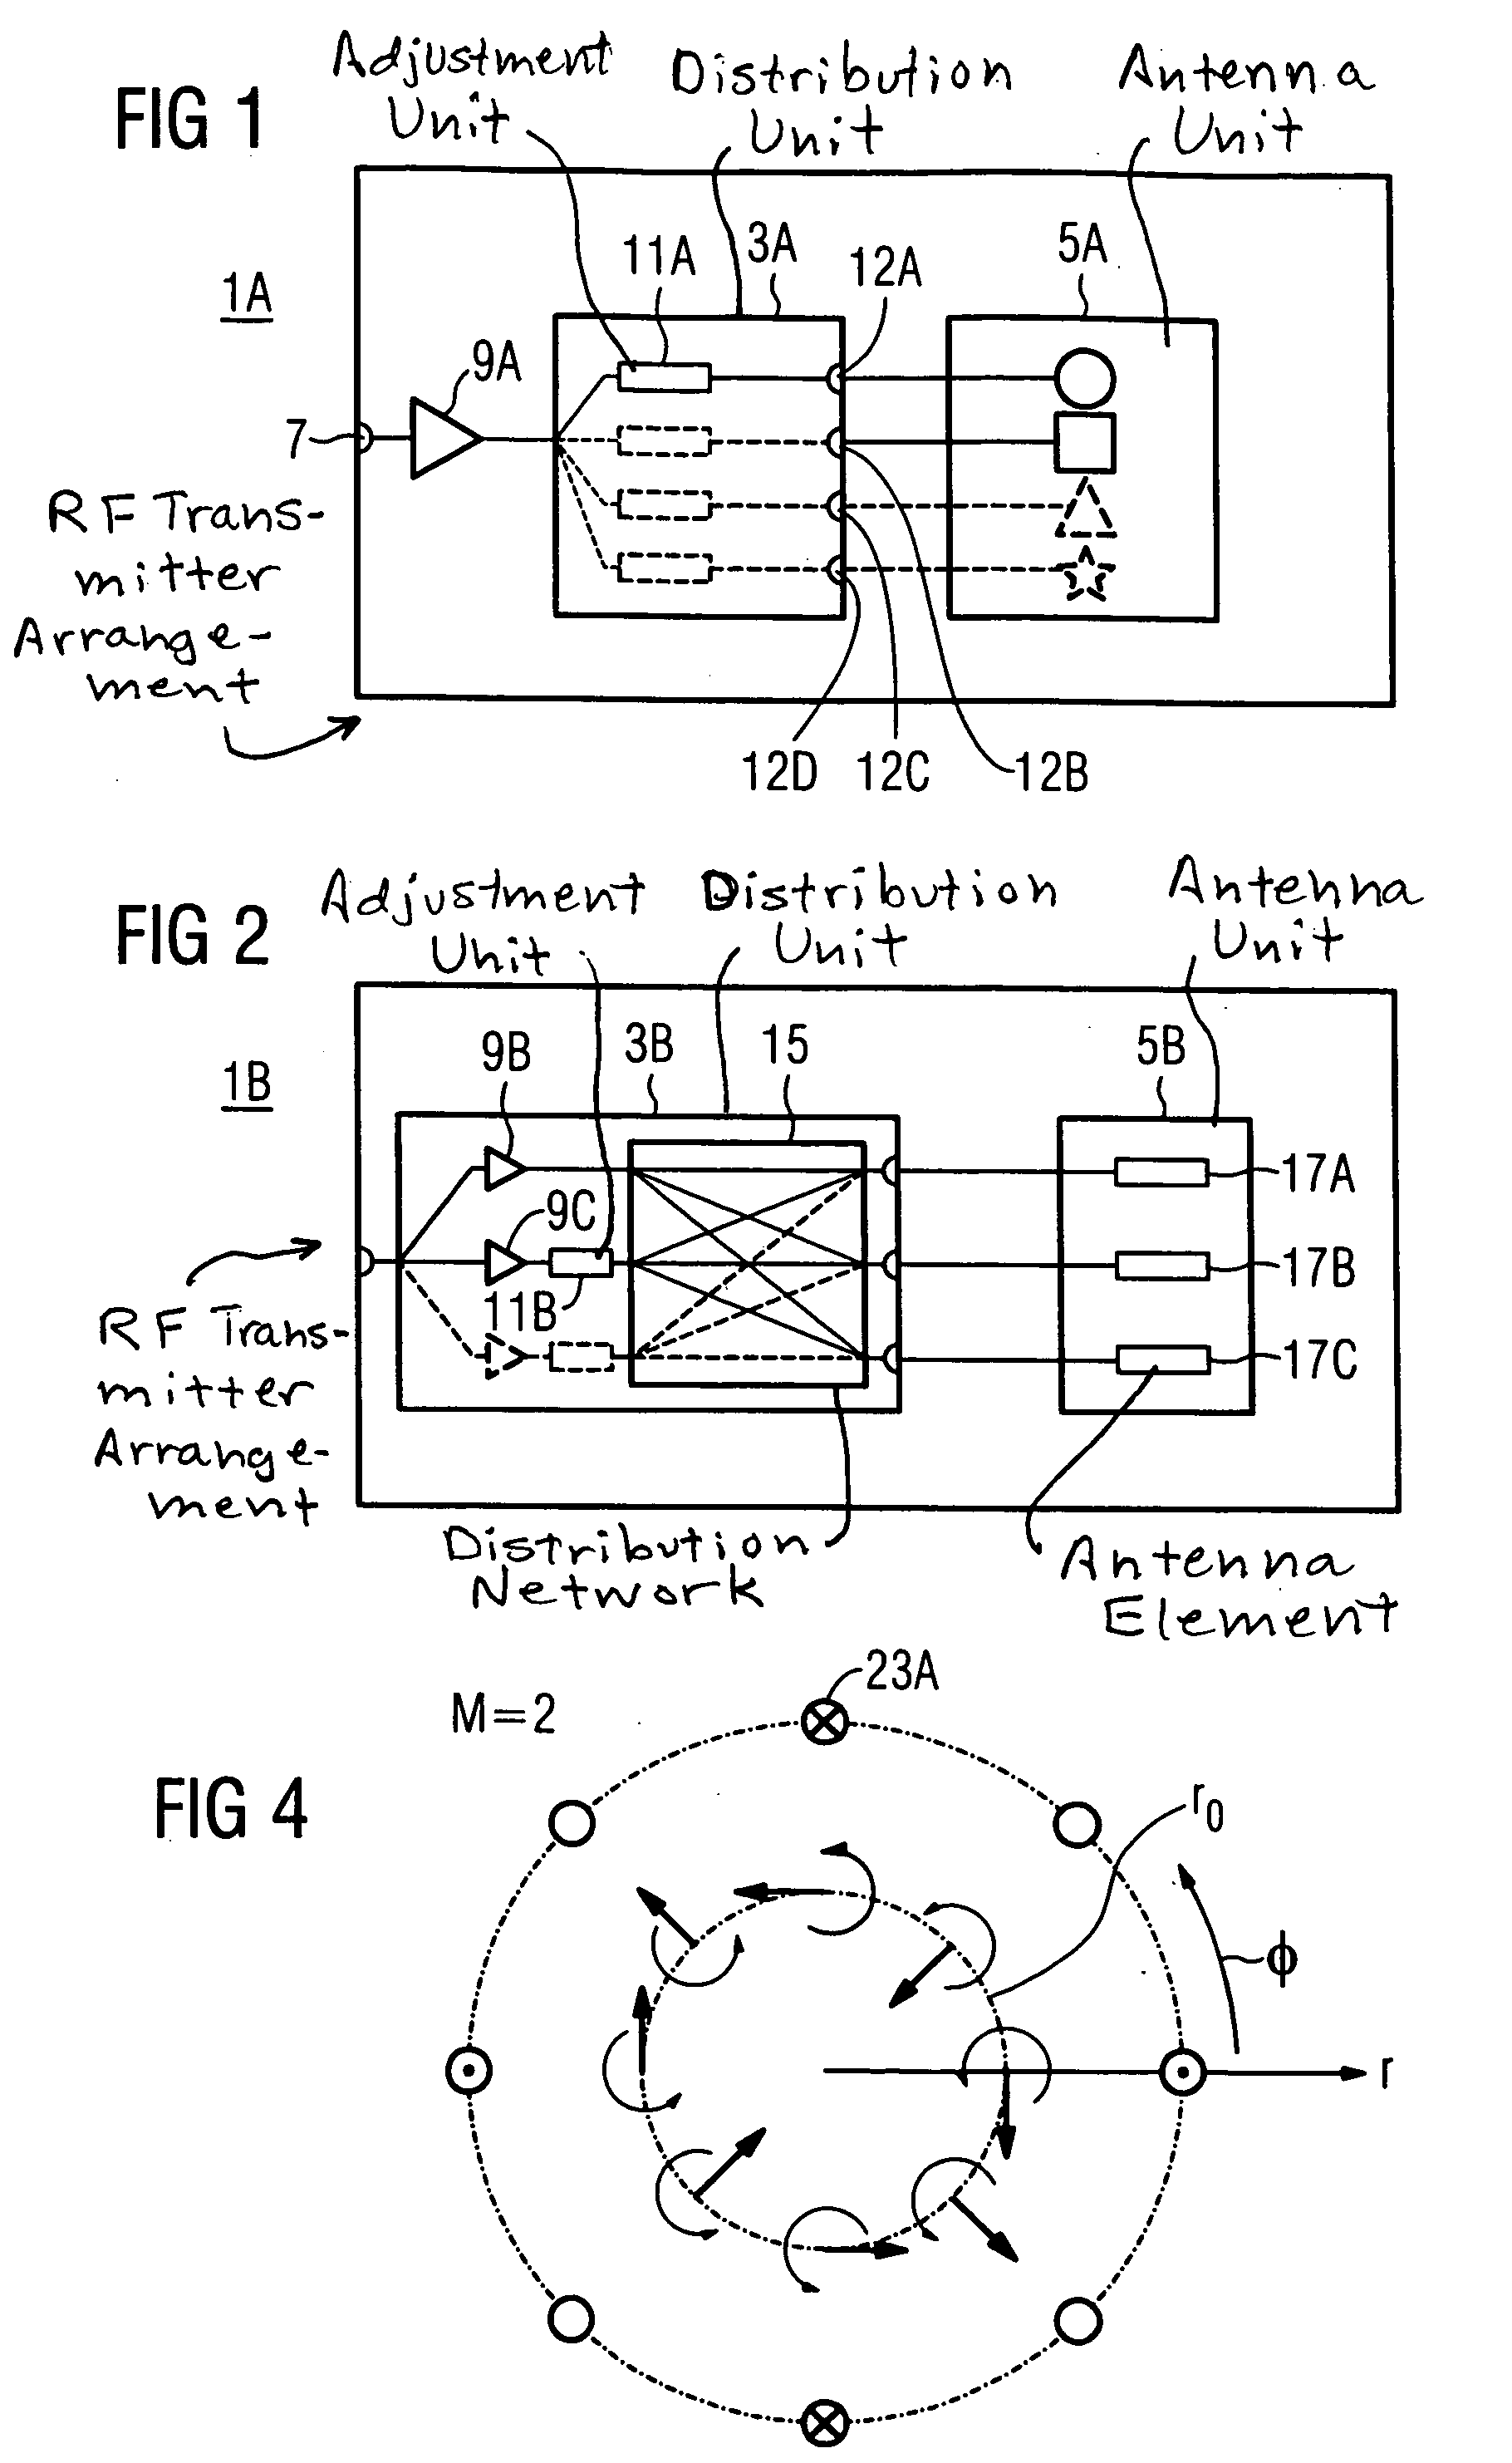 RF transmitter arrangement for an MR system, and method for determining a setting parameter therefor